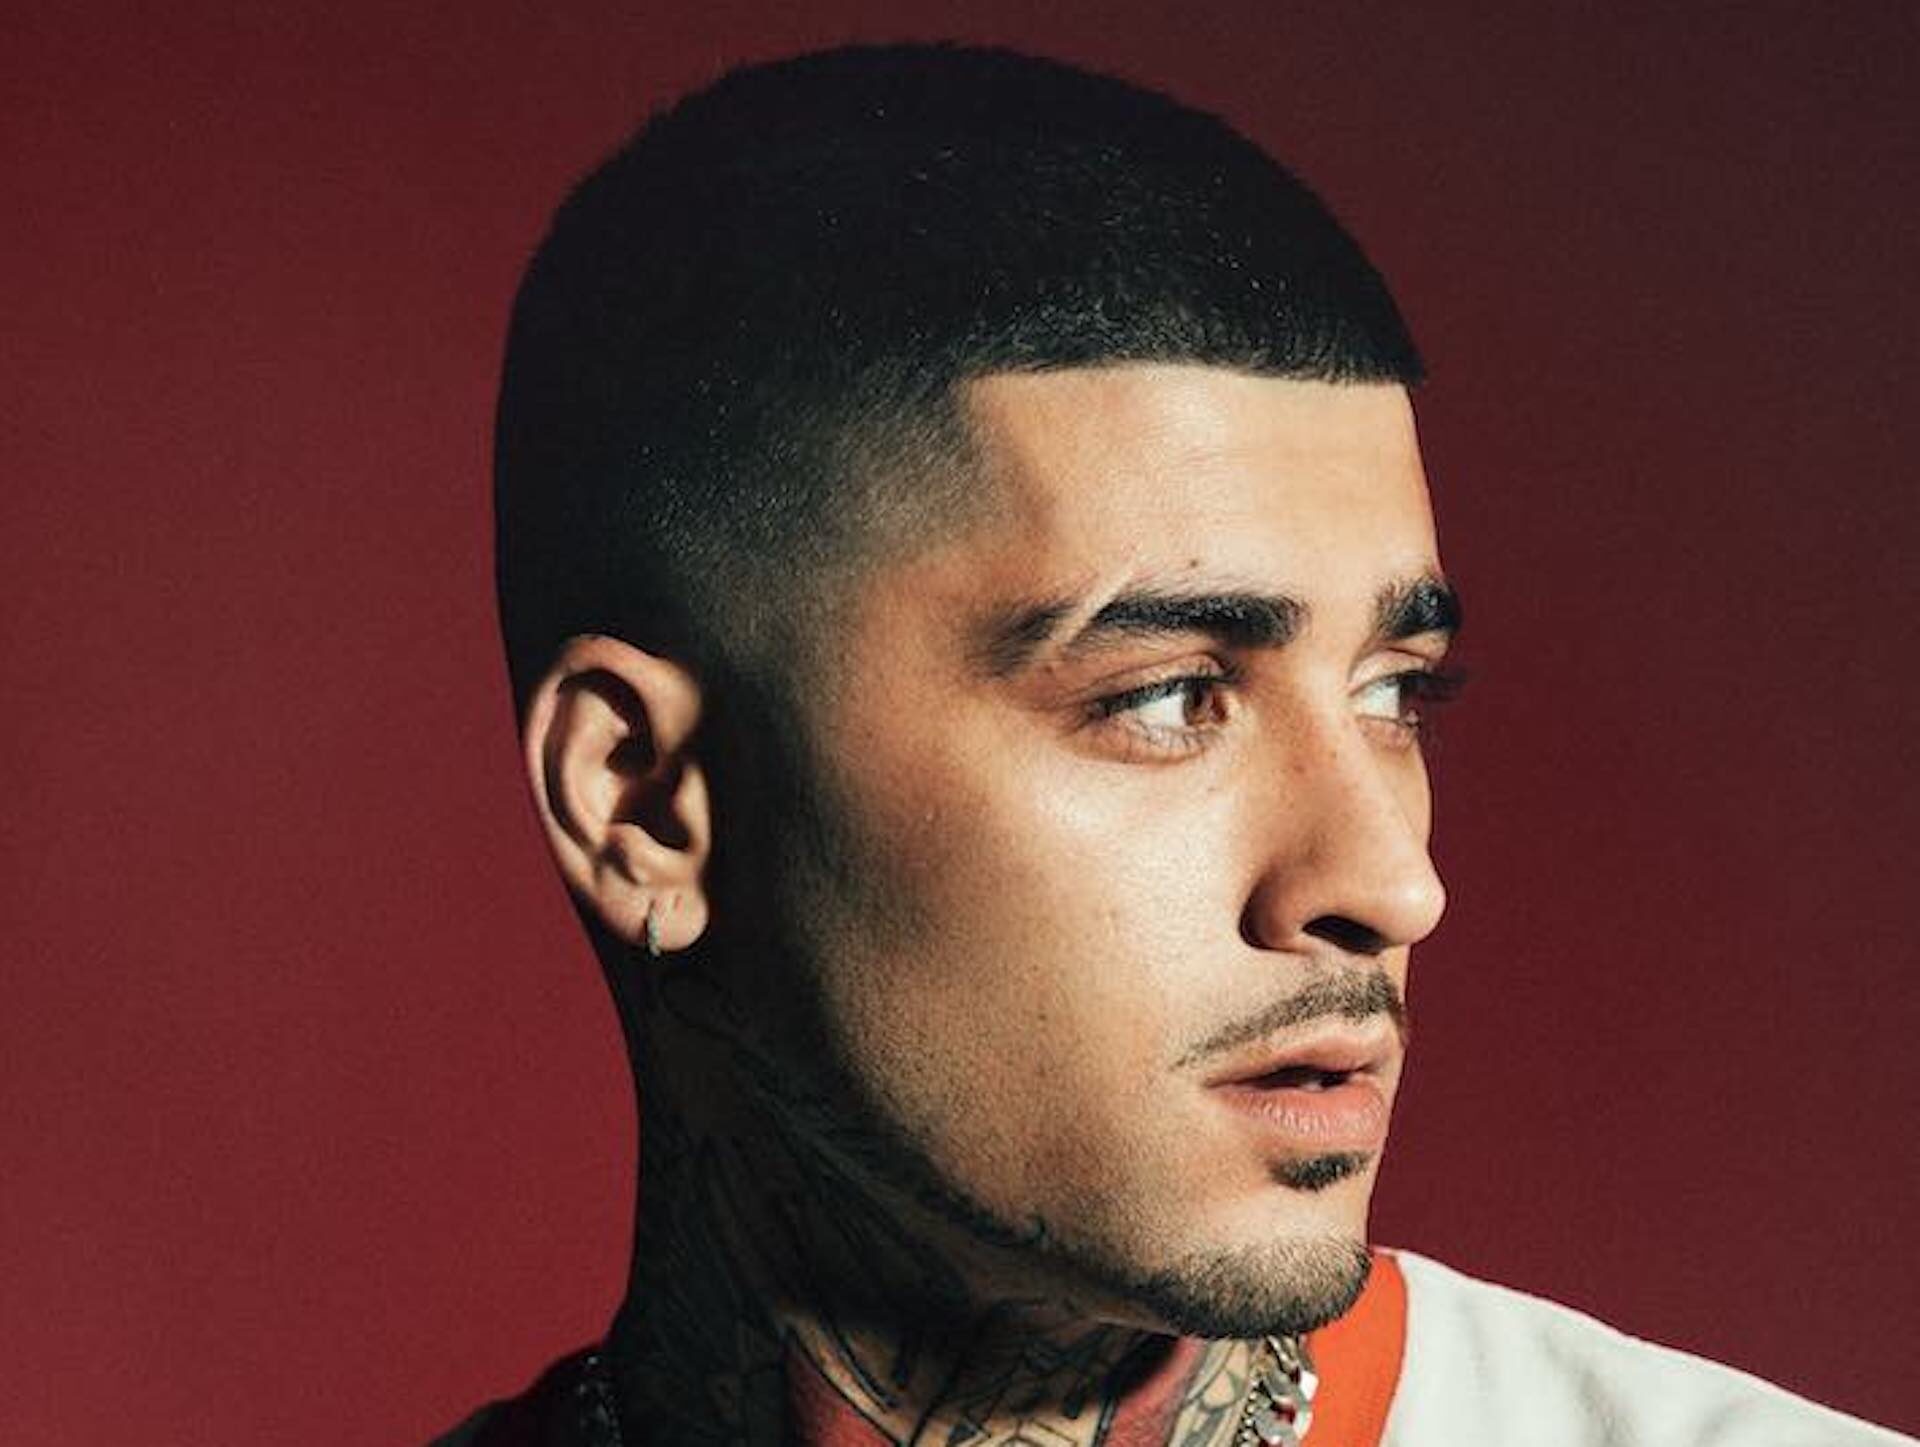 In book, Zayn opens up about eating disorder, 1D, anxiety - Washington Times